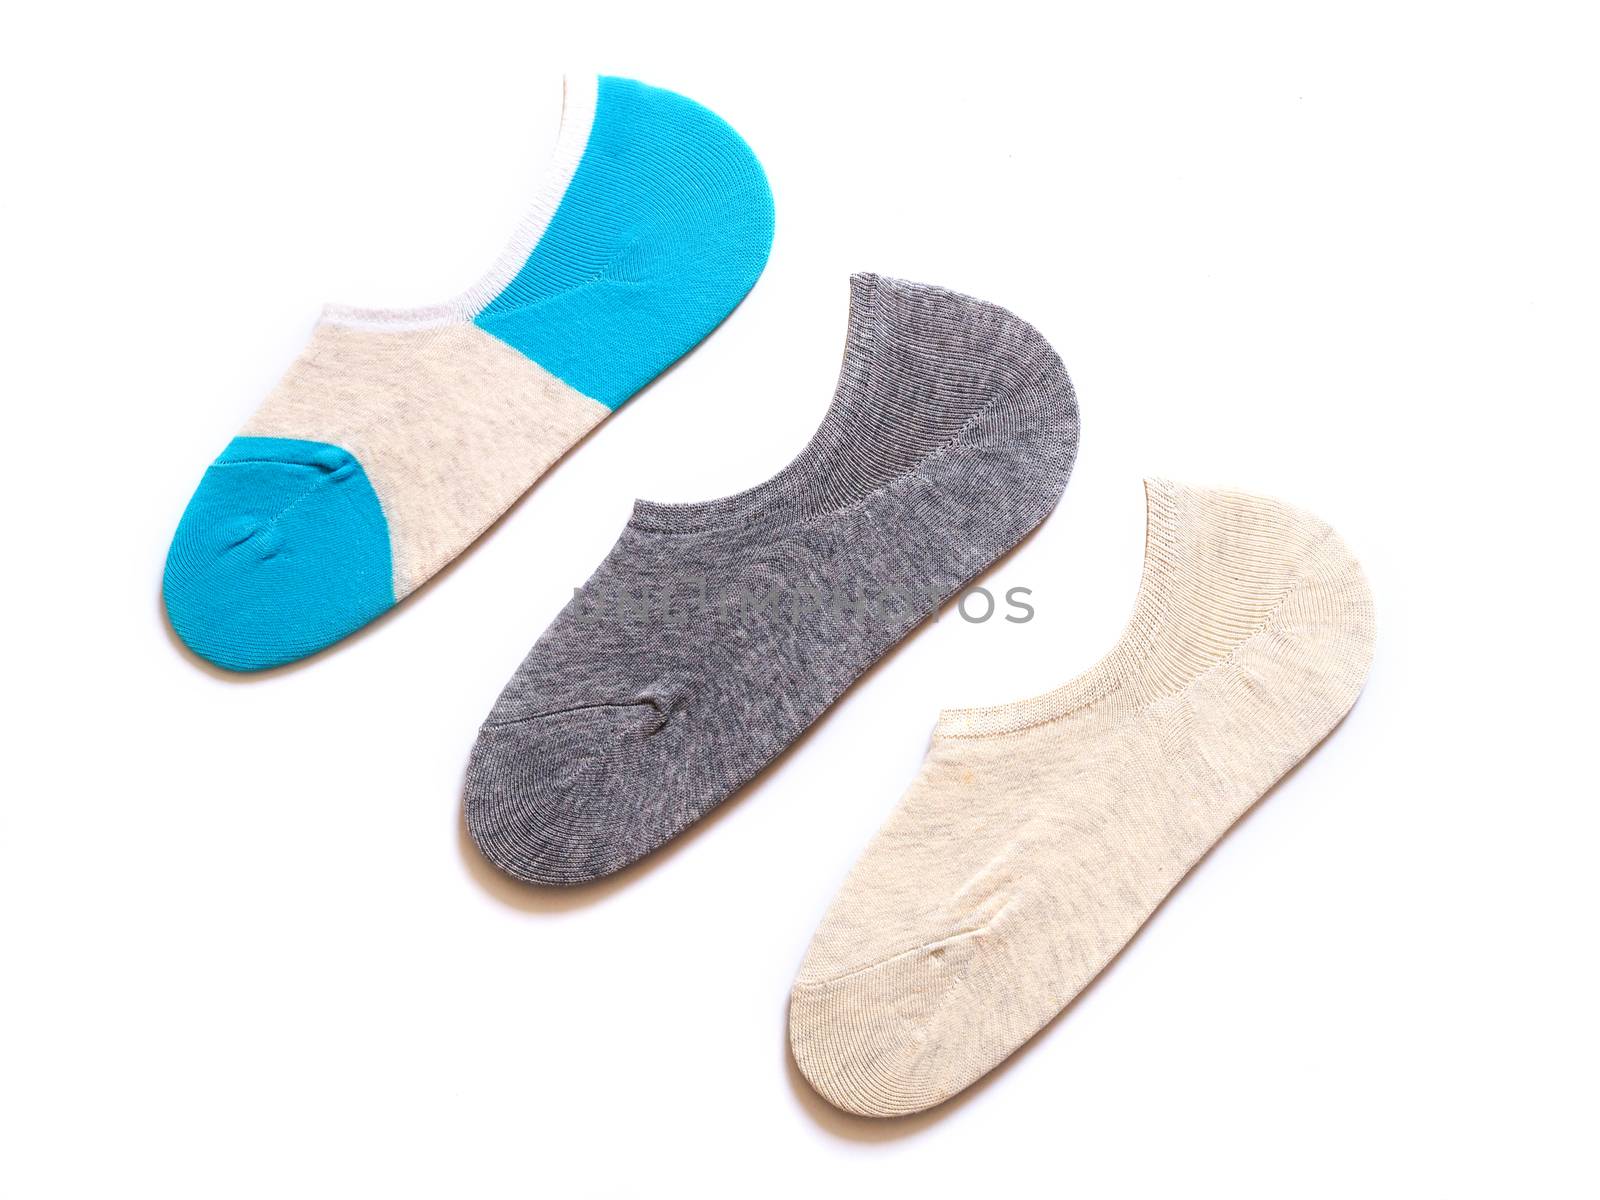 New collection of short socks Comfortable to foot wear. by kittima05